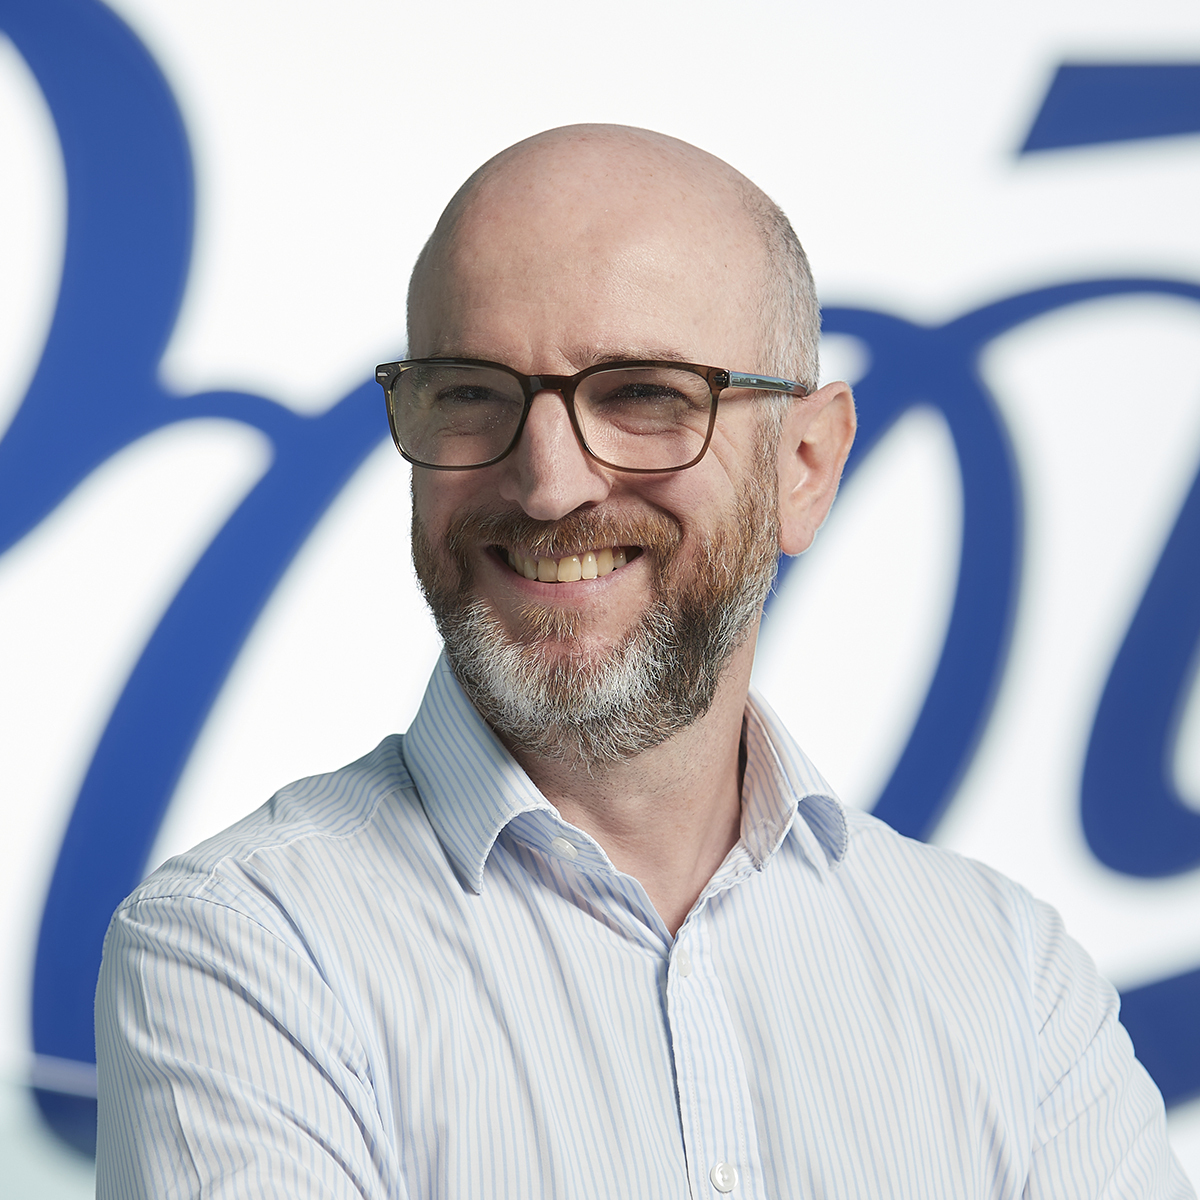 Simon Prinn, Director of Data Science and Analytics, Walgreens Boots Alliance